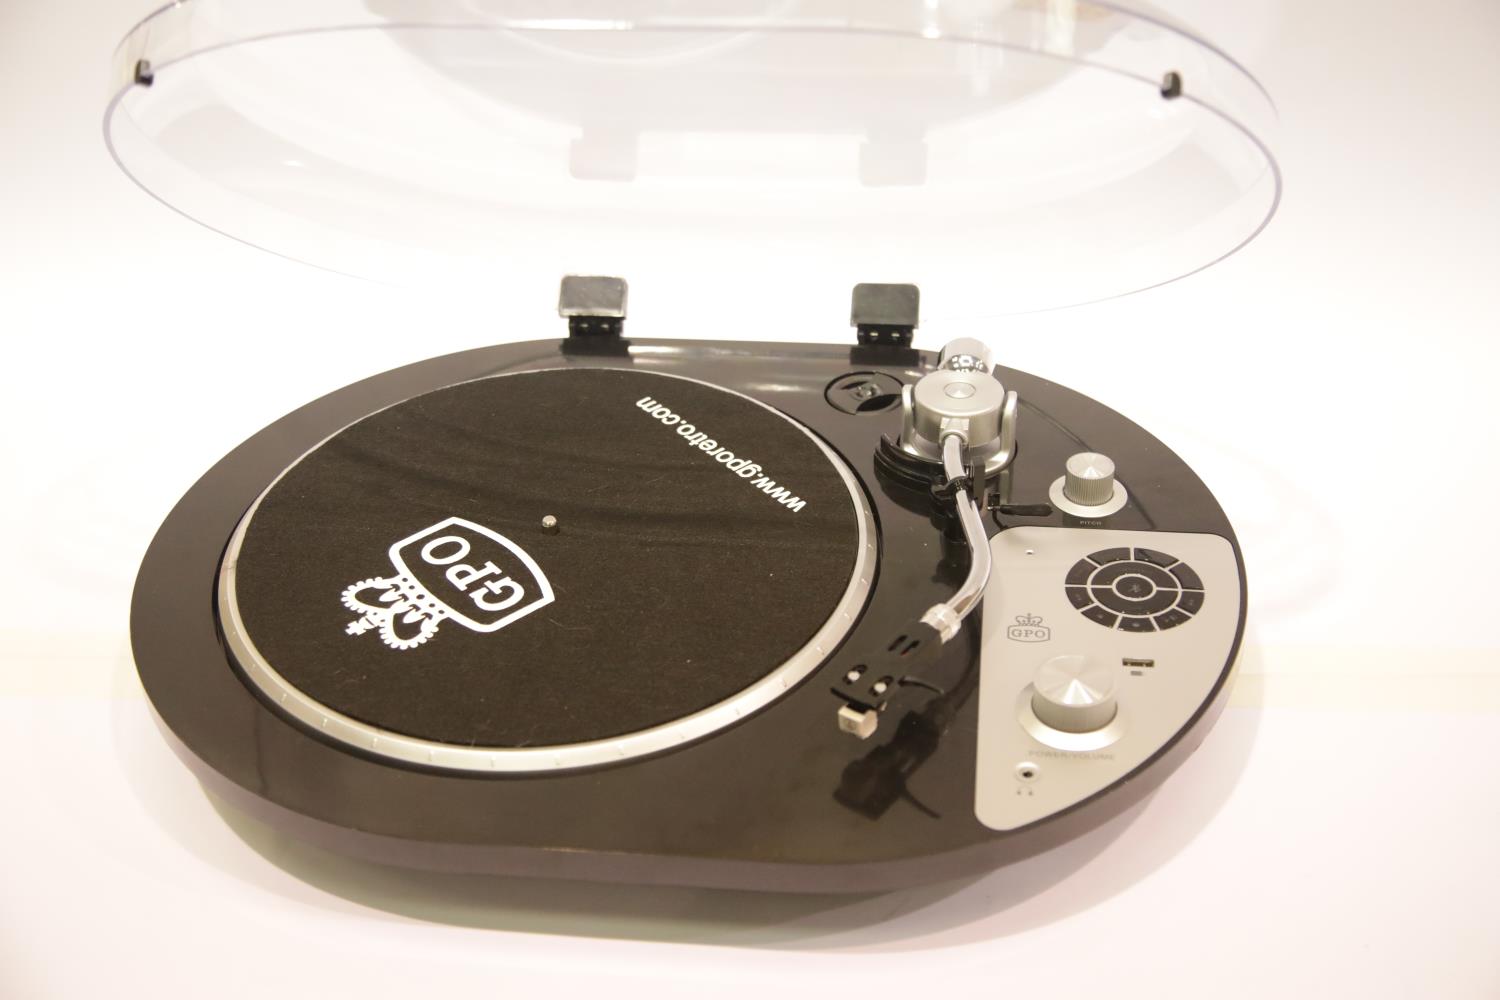 GPO PR50 2 speed turntable with Audio Technica Cartridge. Has aux ports: bluetooth transmitter